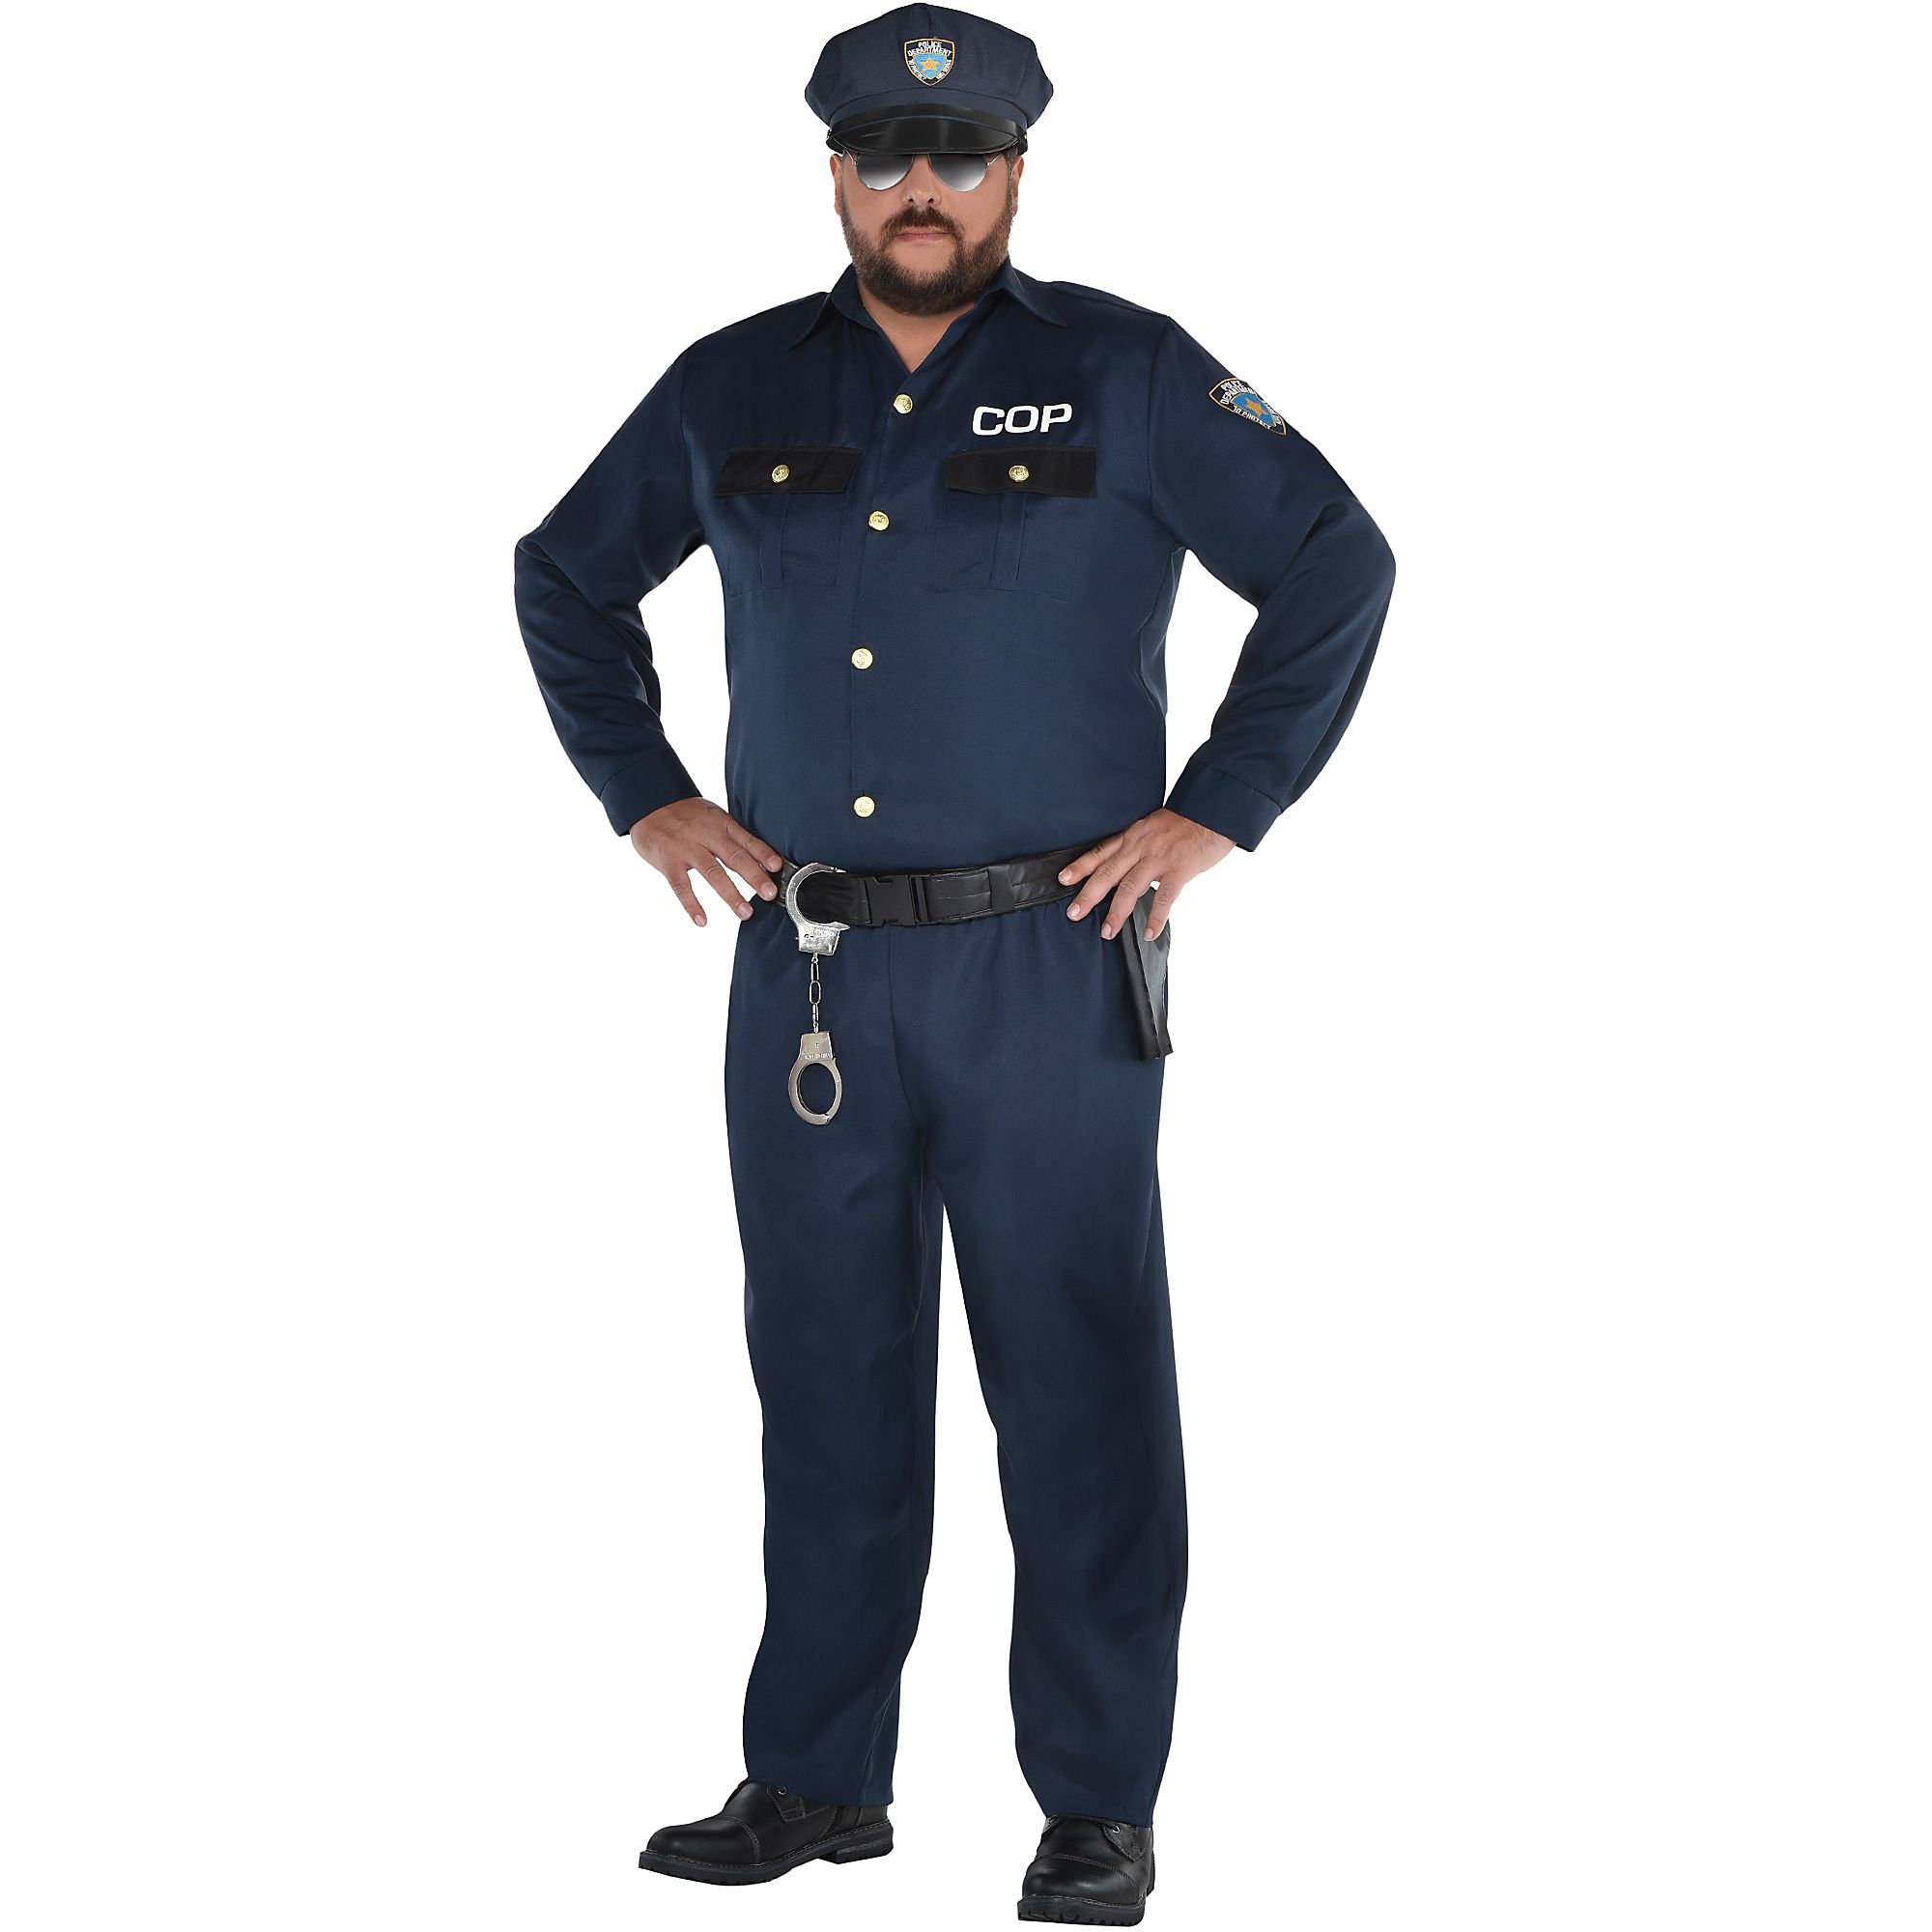 Police Officer Halloween Costume for Men, Plus Size, with Accessories ...